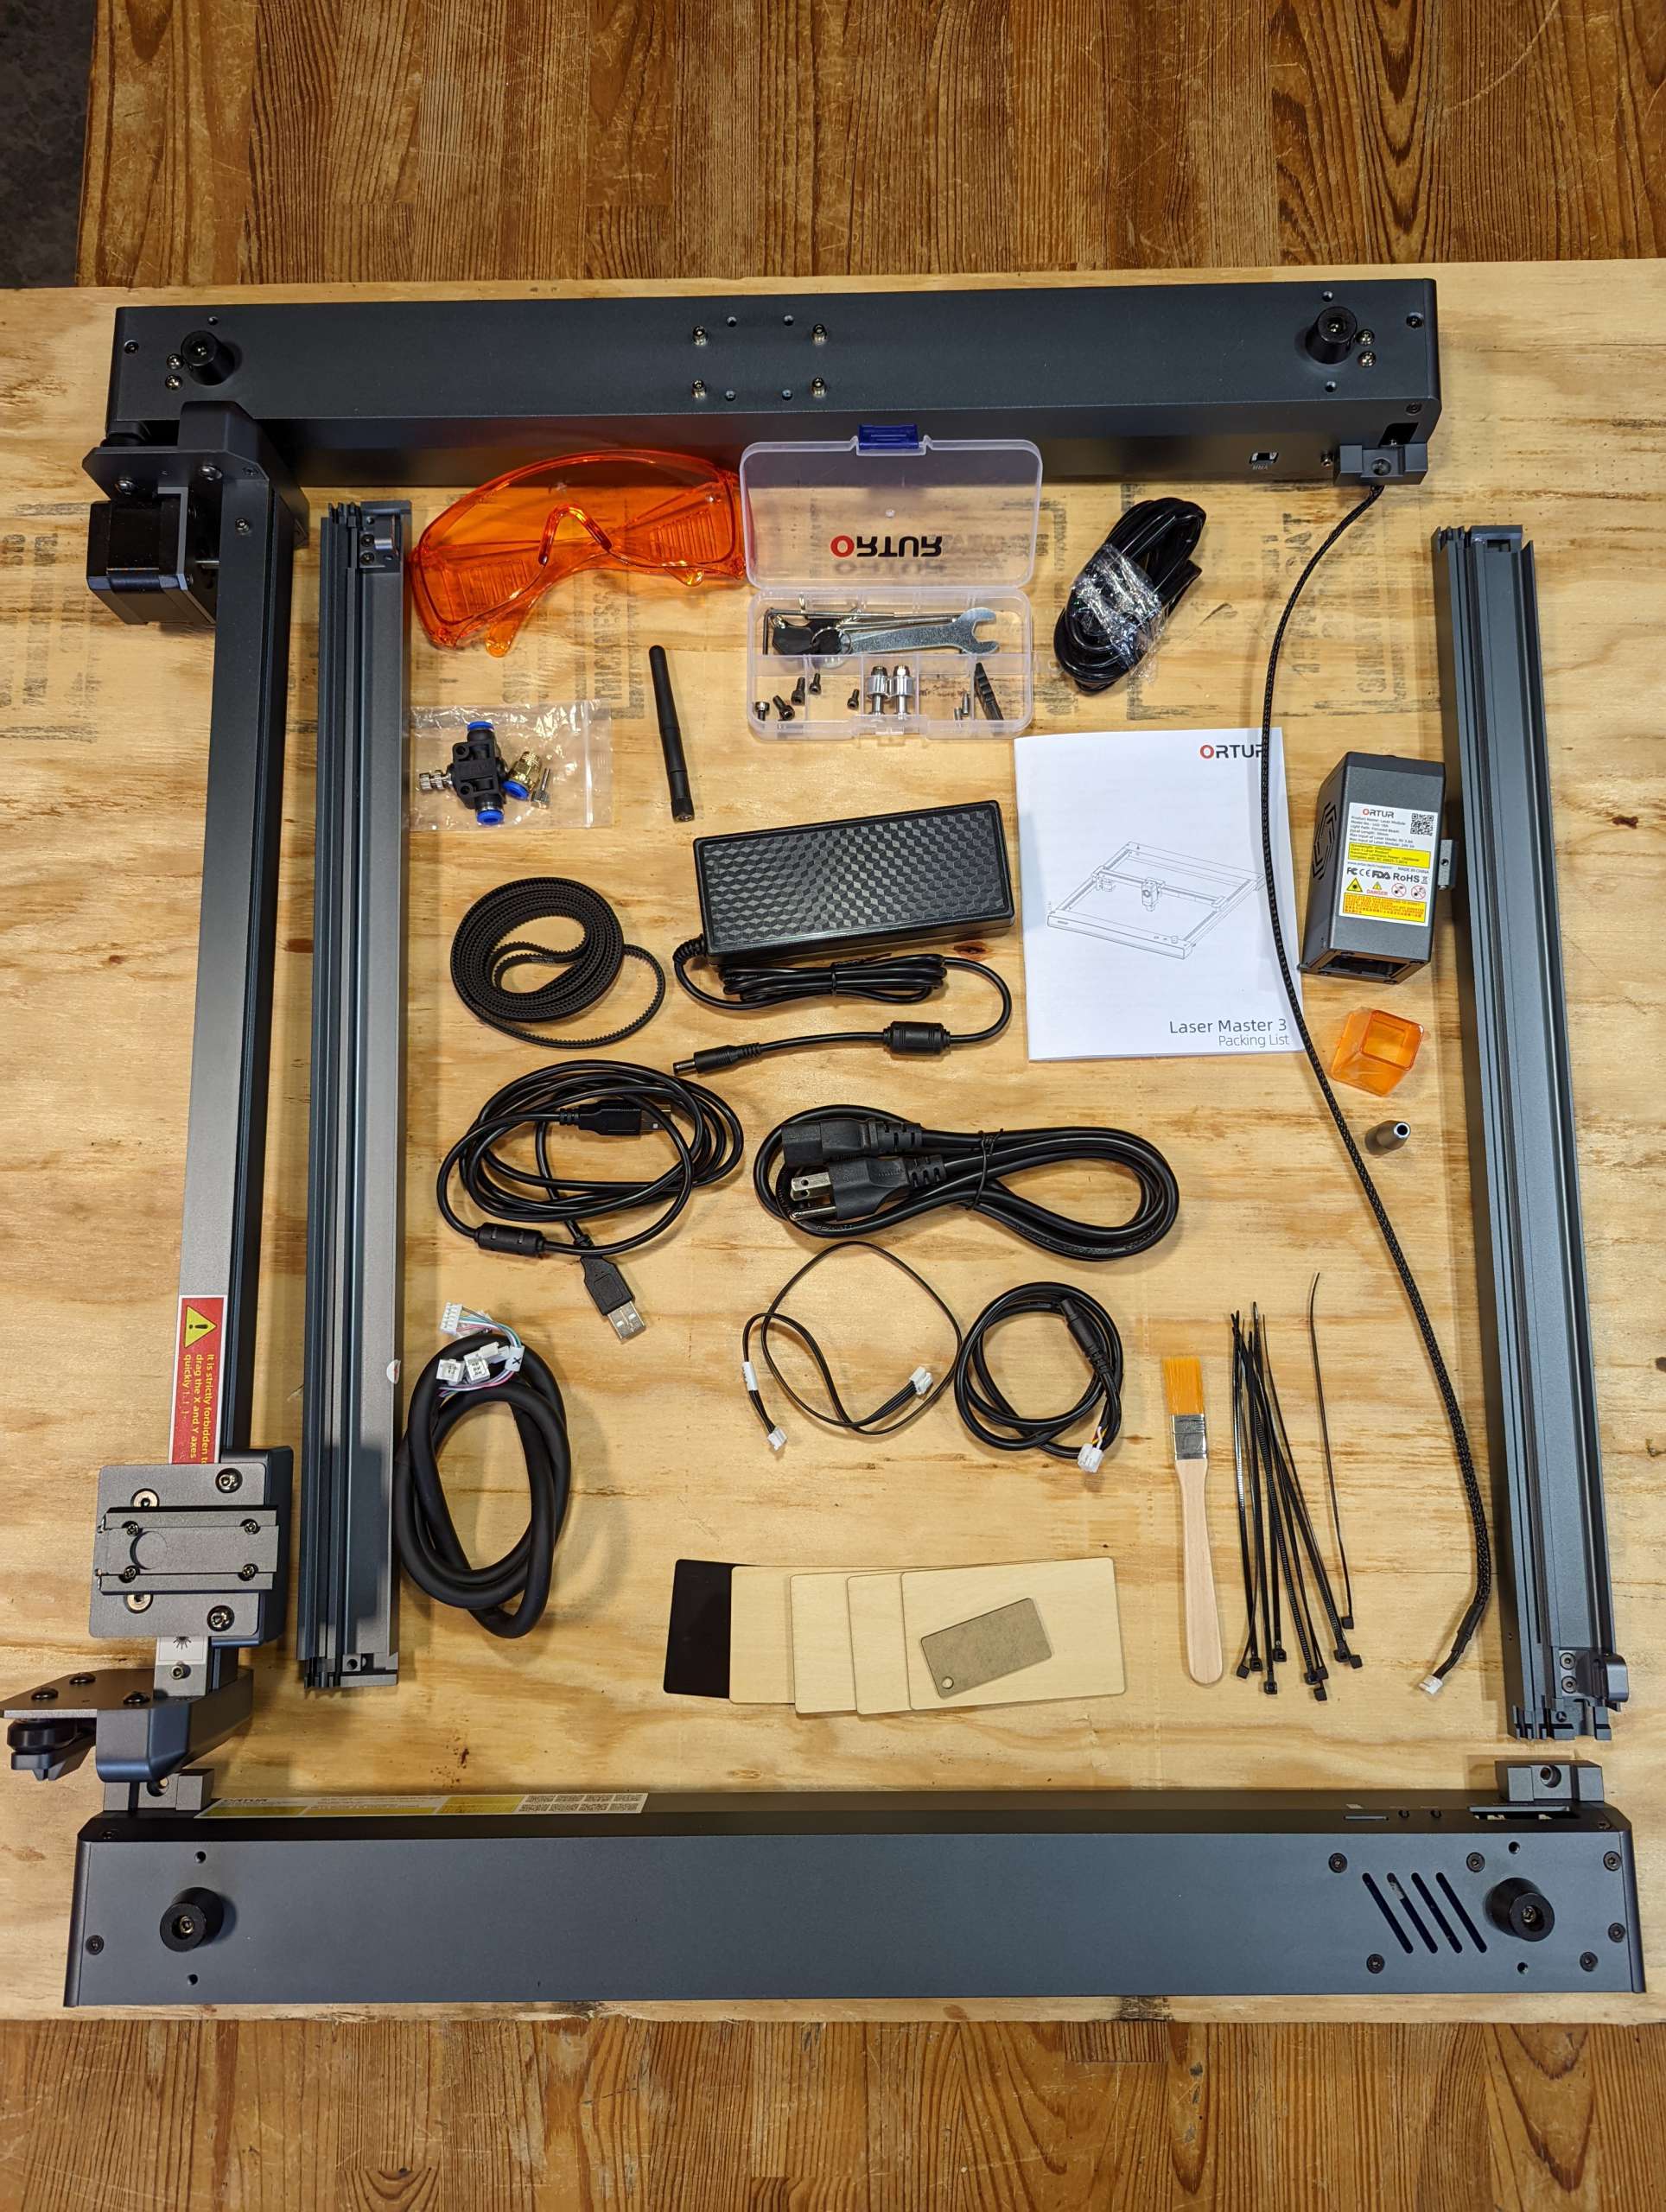 New Ortur Laser Master 3-10 Watt Output Engraver Assembly And First Project  